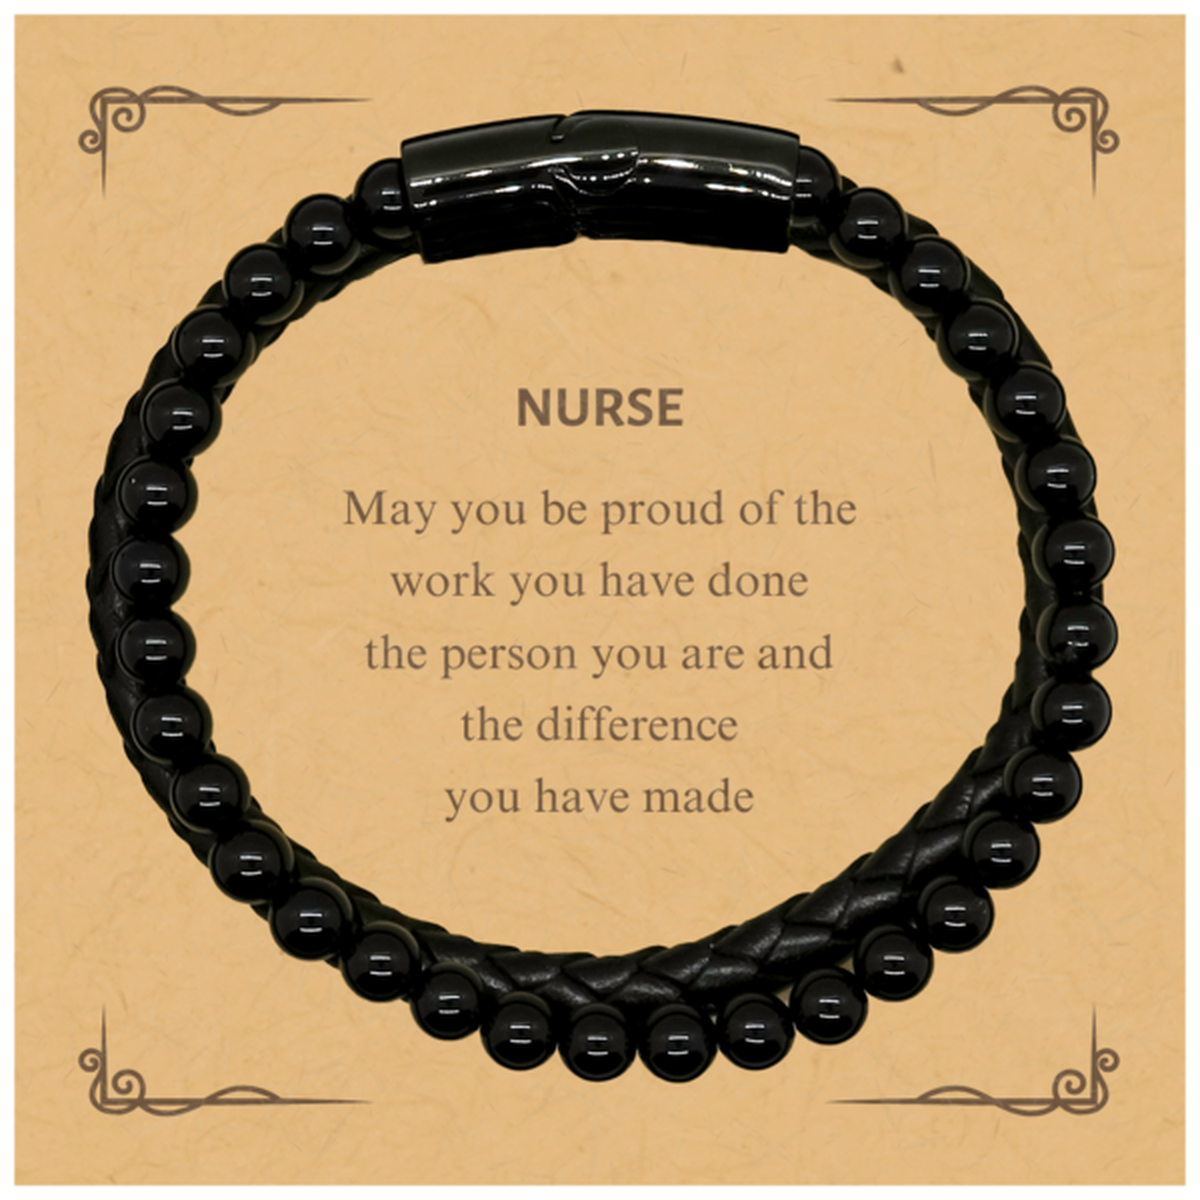 Nurse May you be proud of the work you have done, Retirement Nurse Stone Leather Bracelets for Colleague Appreciation Gifts Amazing for Nurse